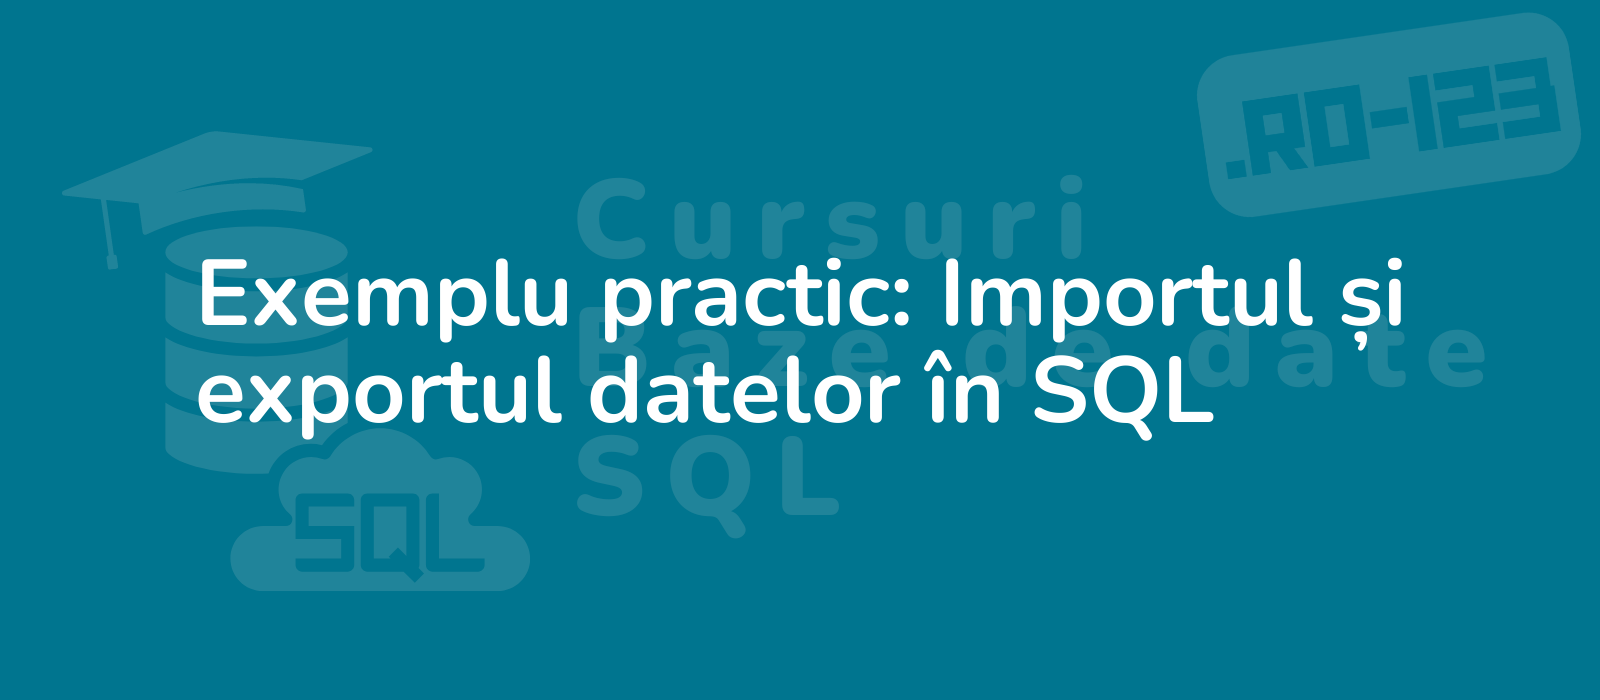 practical example importing and exporting data in sql depicted with a simple yet informative image illustrating database management